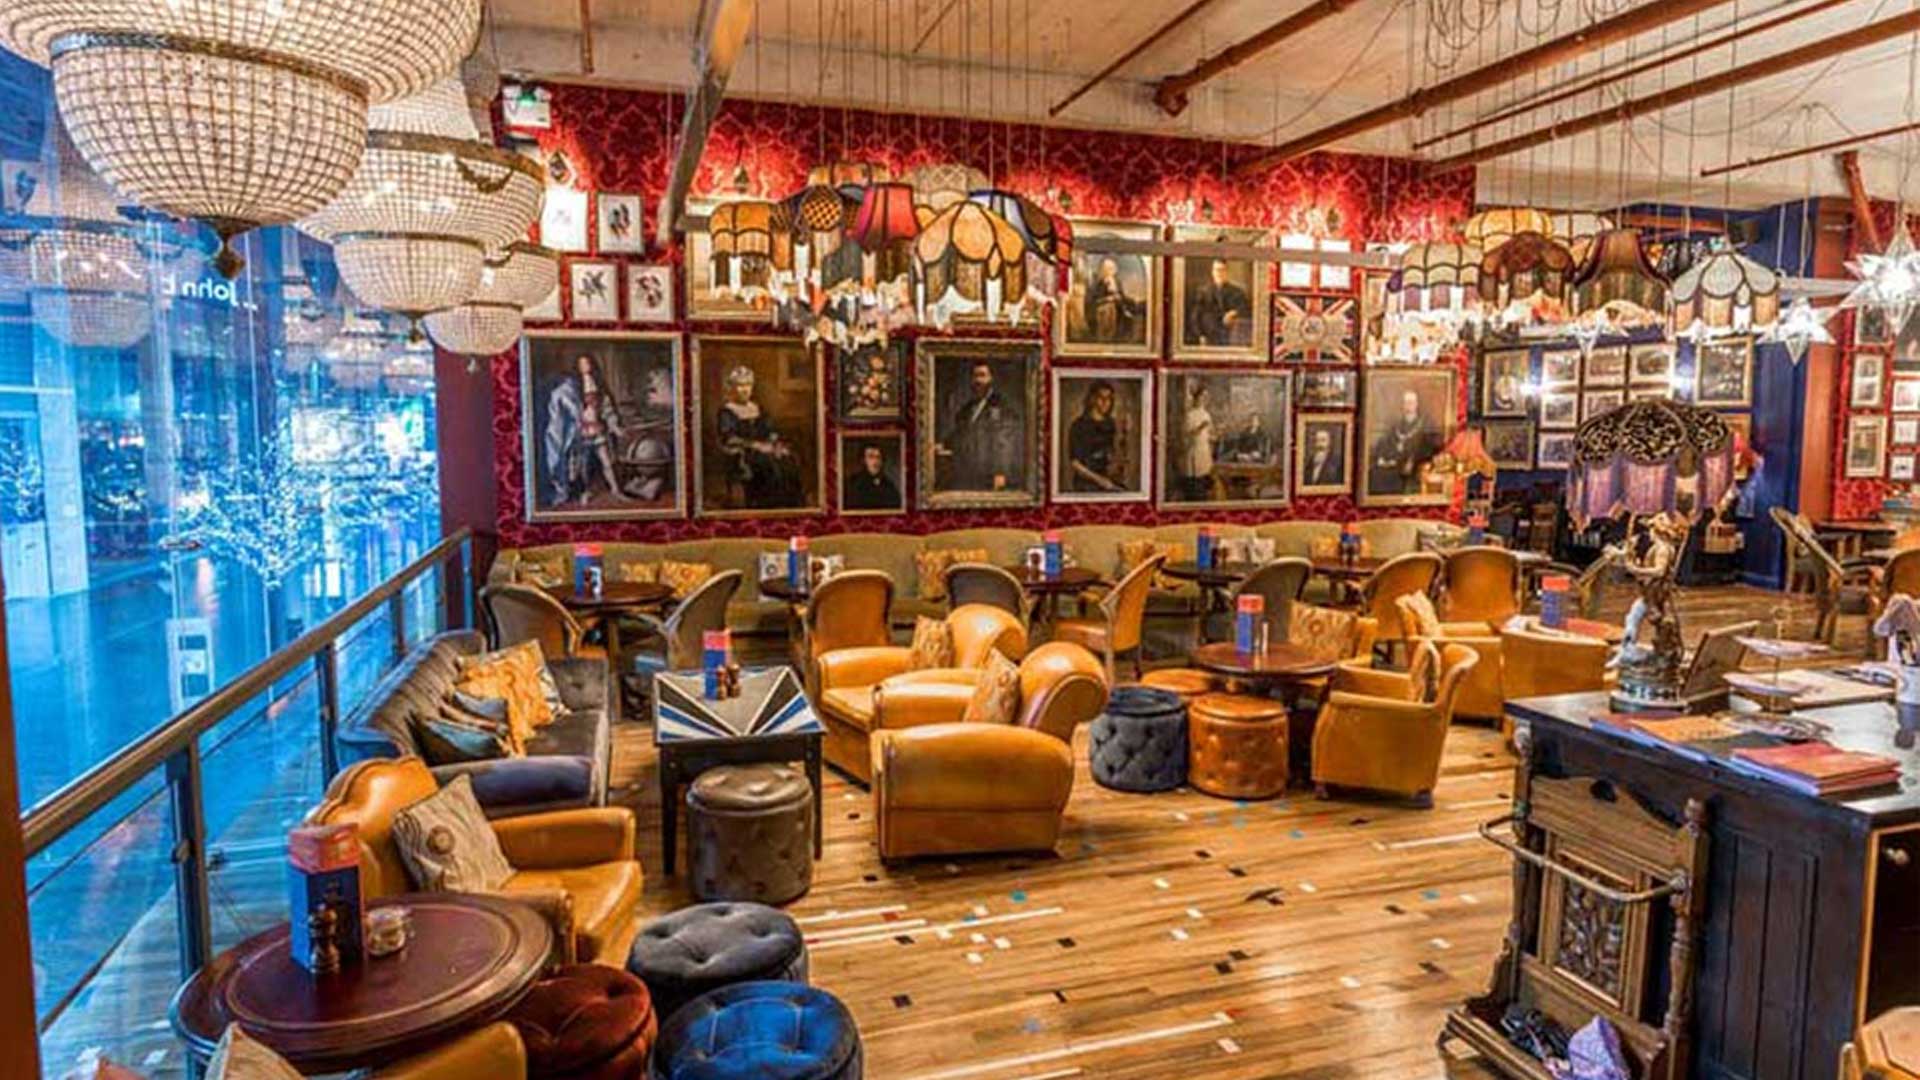 Eclectic vintage-style bar lounge area with portrait gallery.